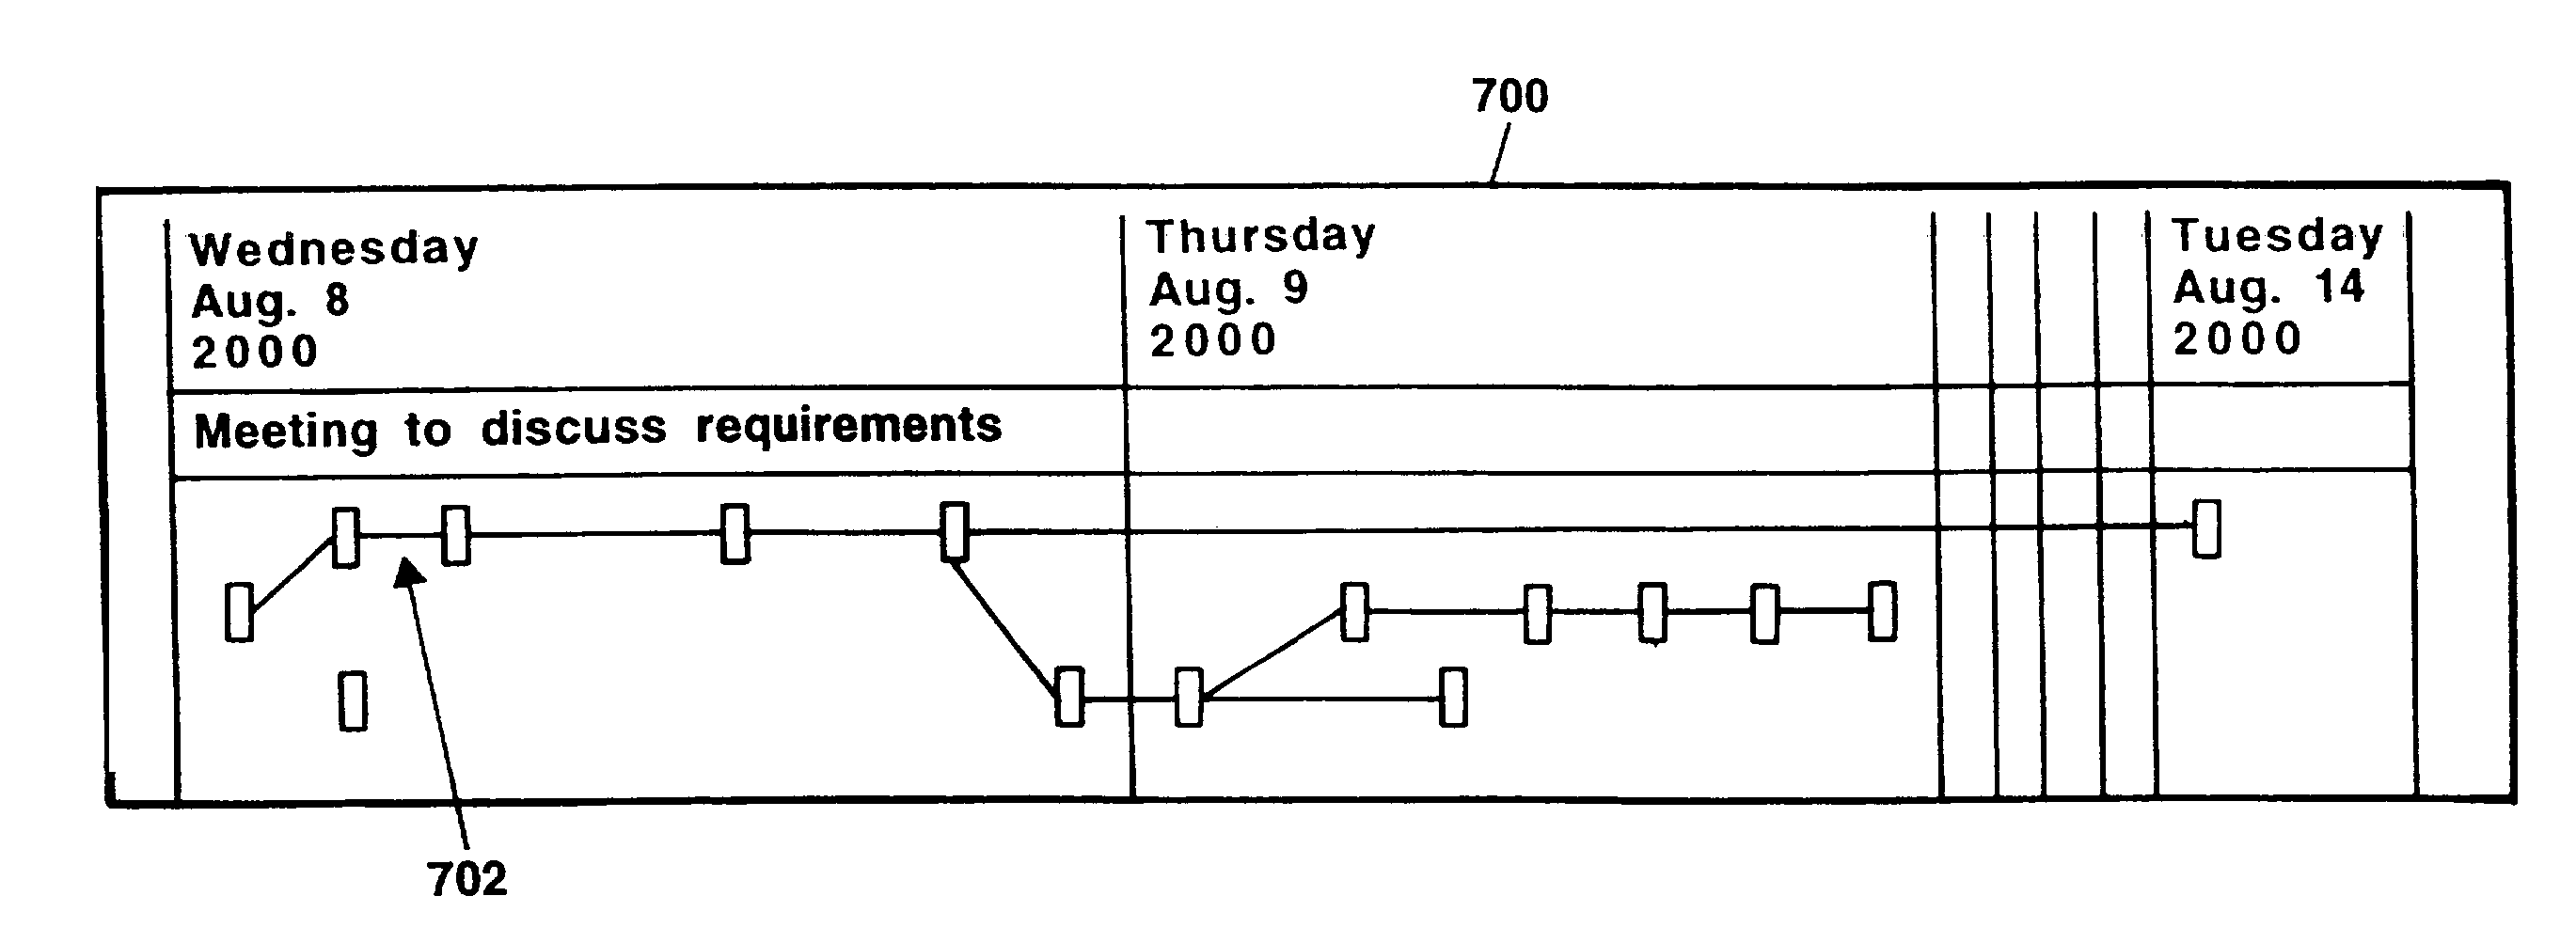 Calendar bar interface for electronic mail interaction